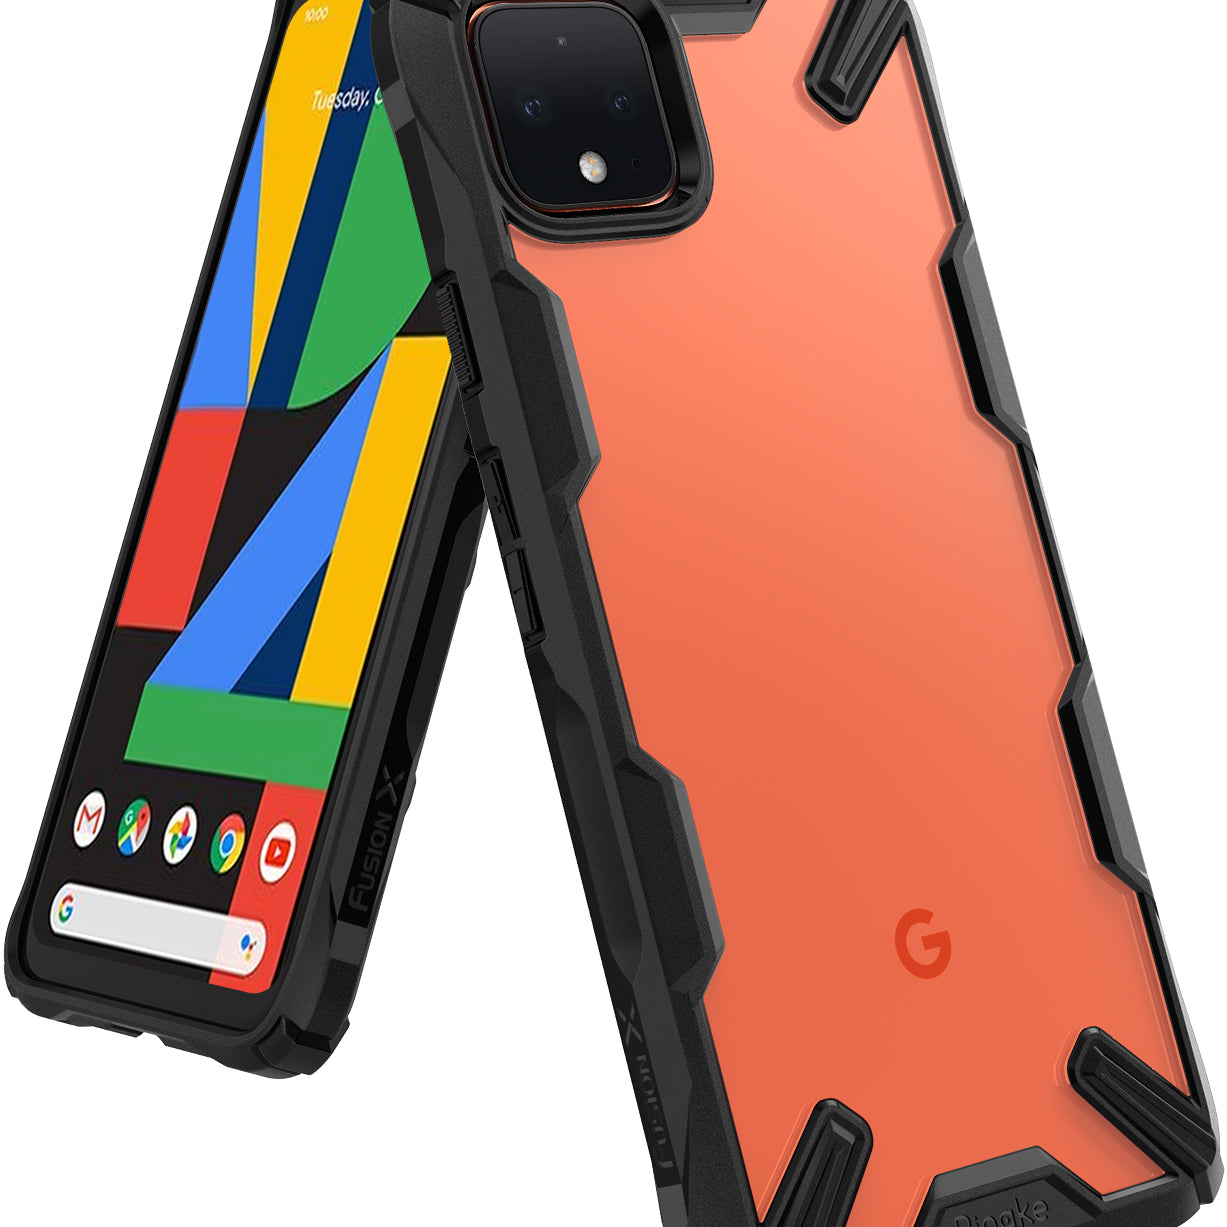 Ringke Fusion-X Case compatible with Google Pixel 4, Black